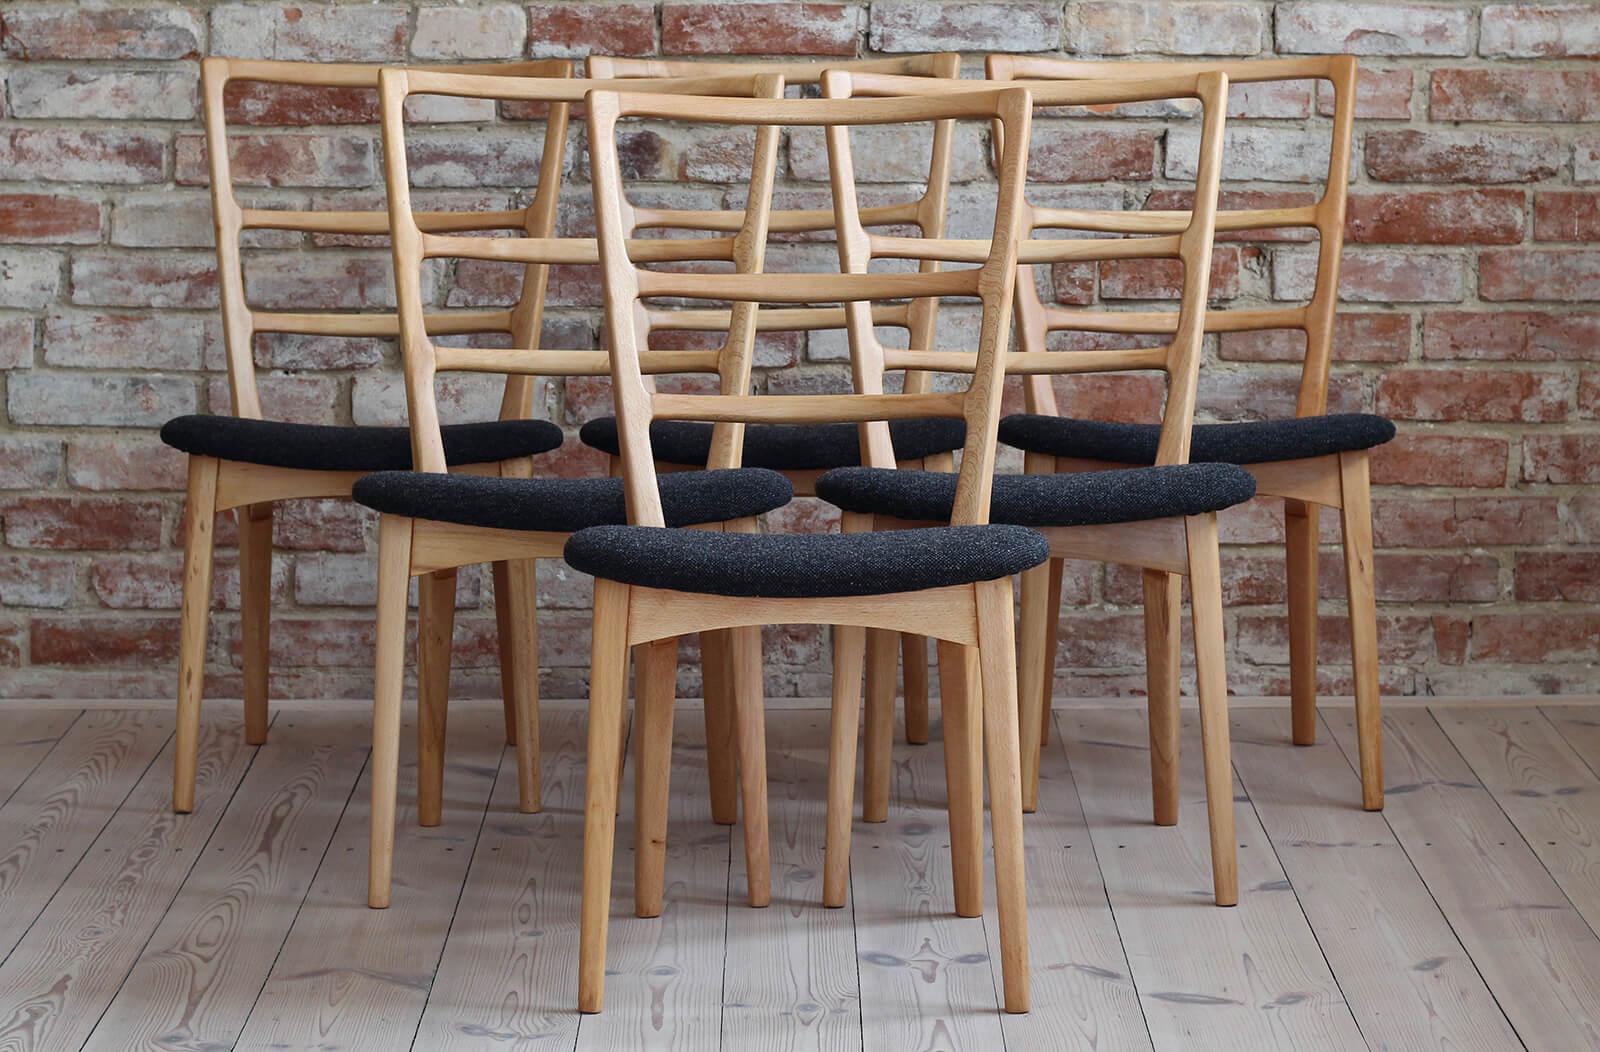 This set of six vintage dining chairs was designed by Marian Grabinski around 1960s, famous Polish designer. The chairs are very light in form and comfortable in use. The chairs have been completely restored finished in natural oil that protects the